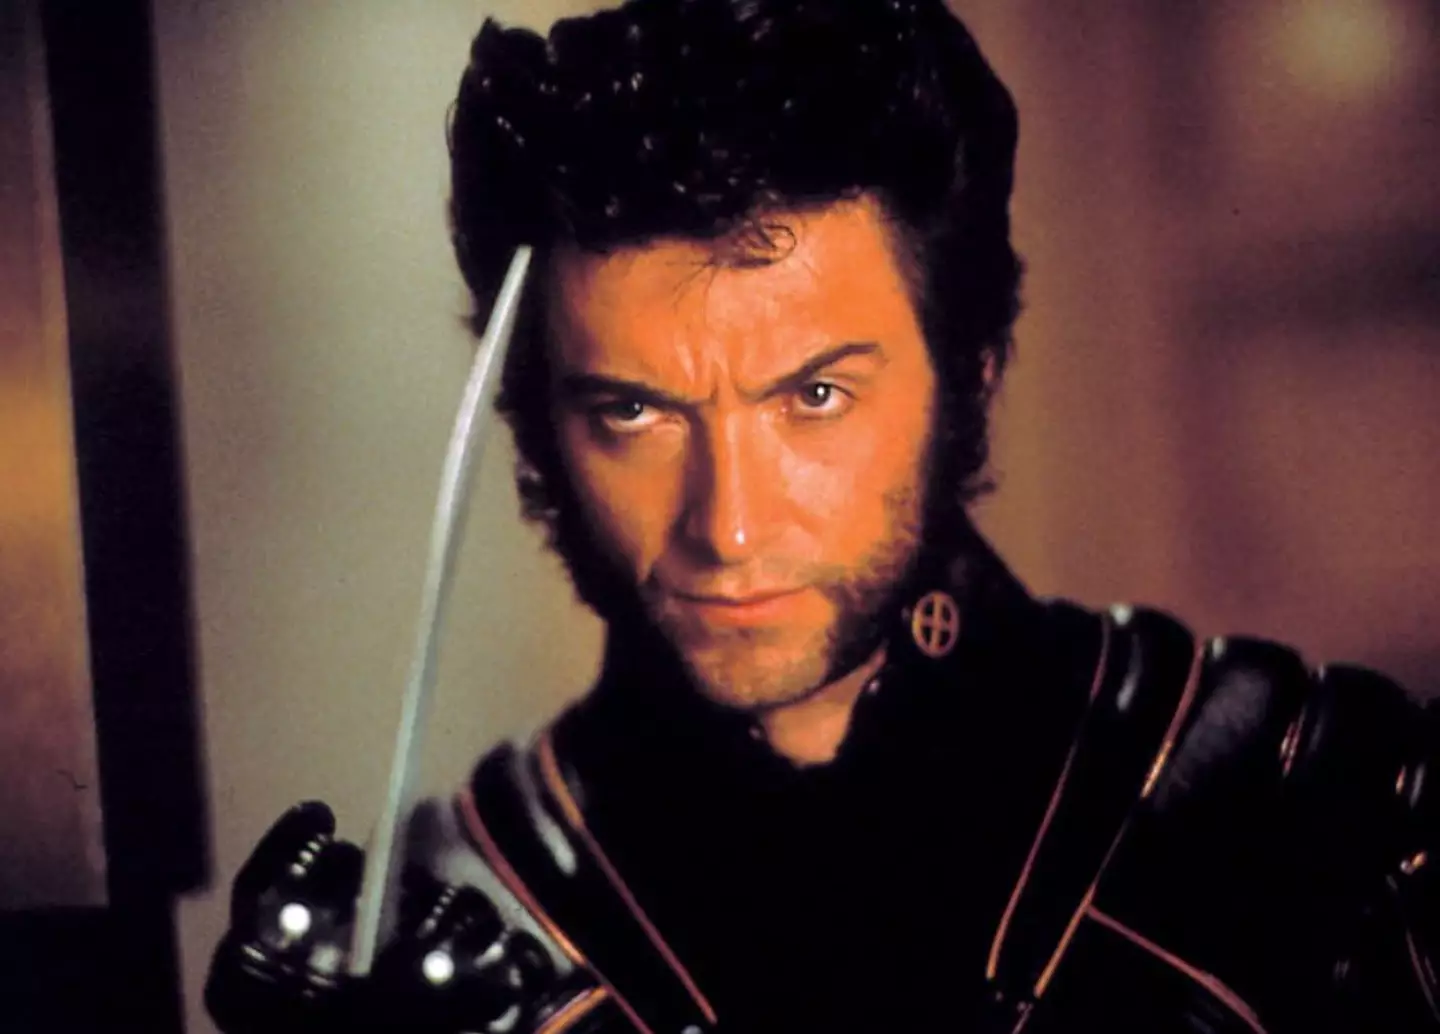 Jackman first appeared as Wolverine in the first X-Men movie in 2000.